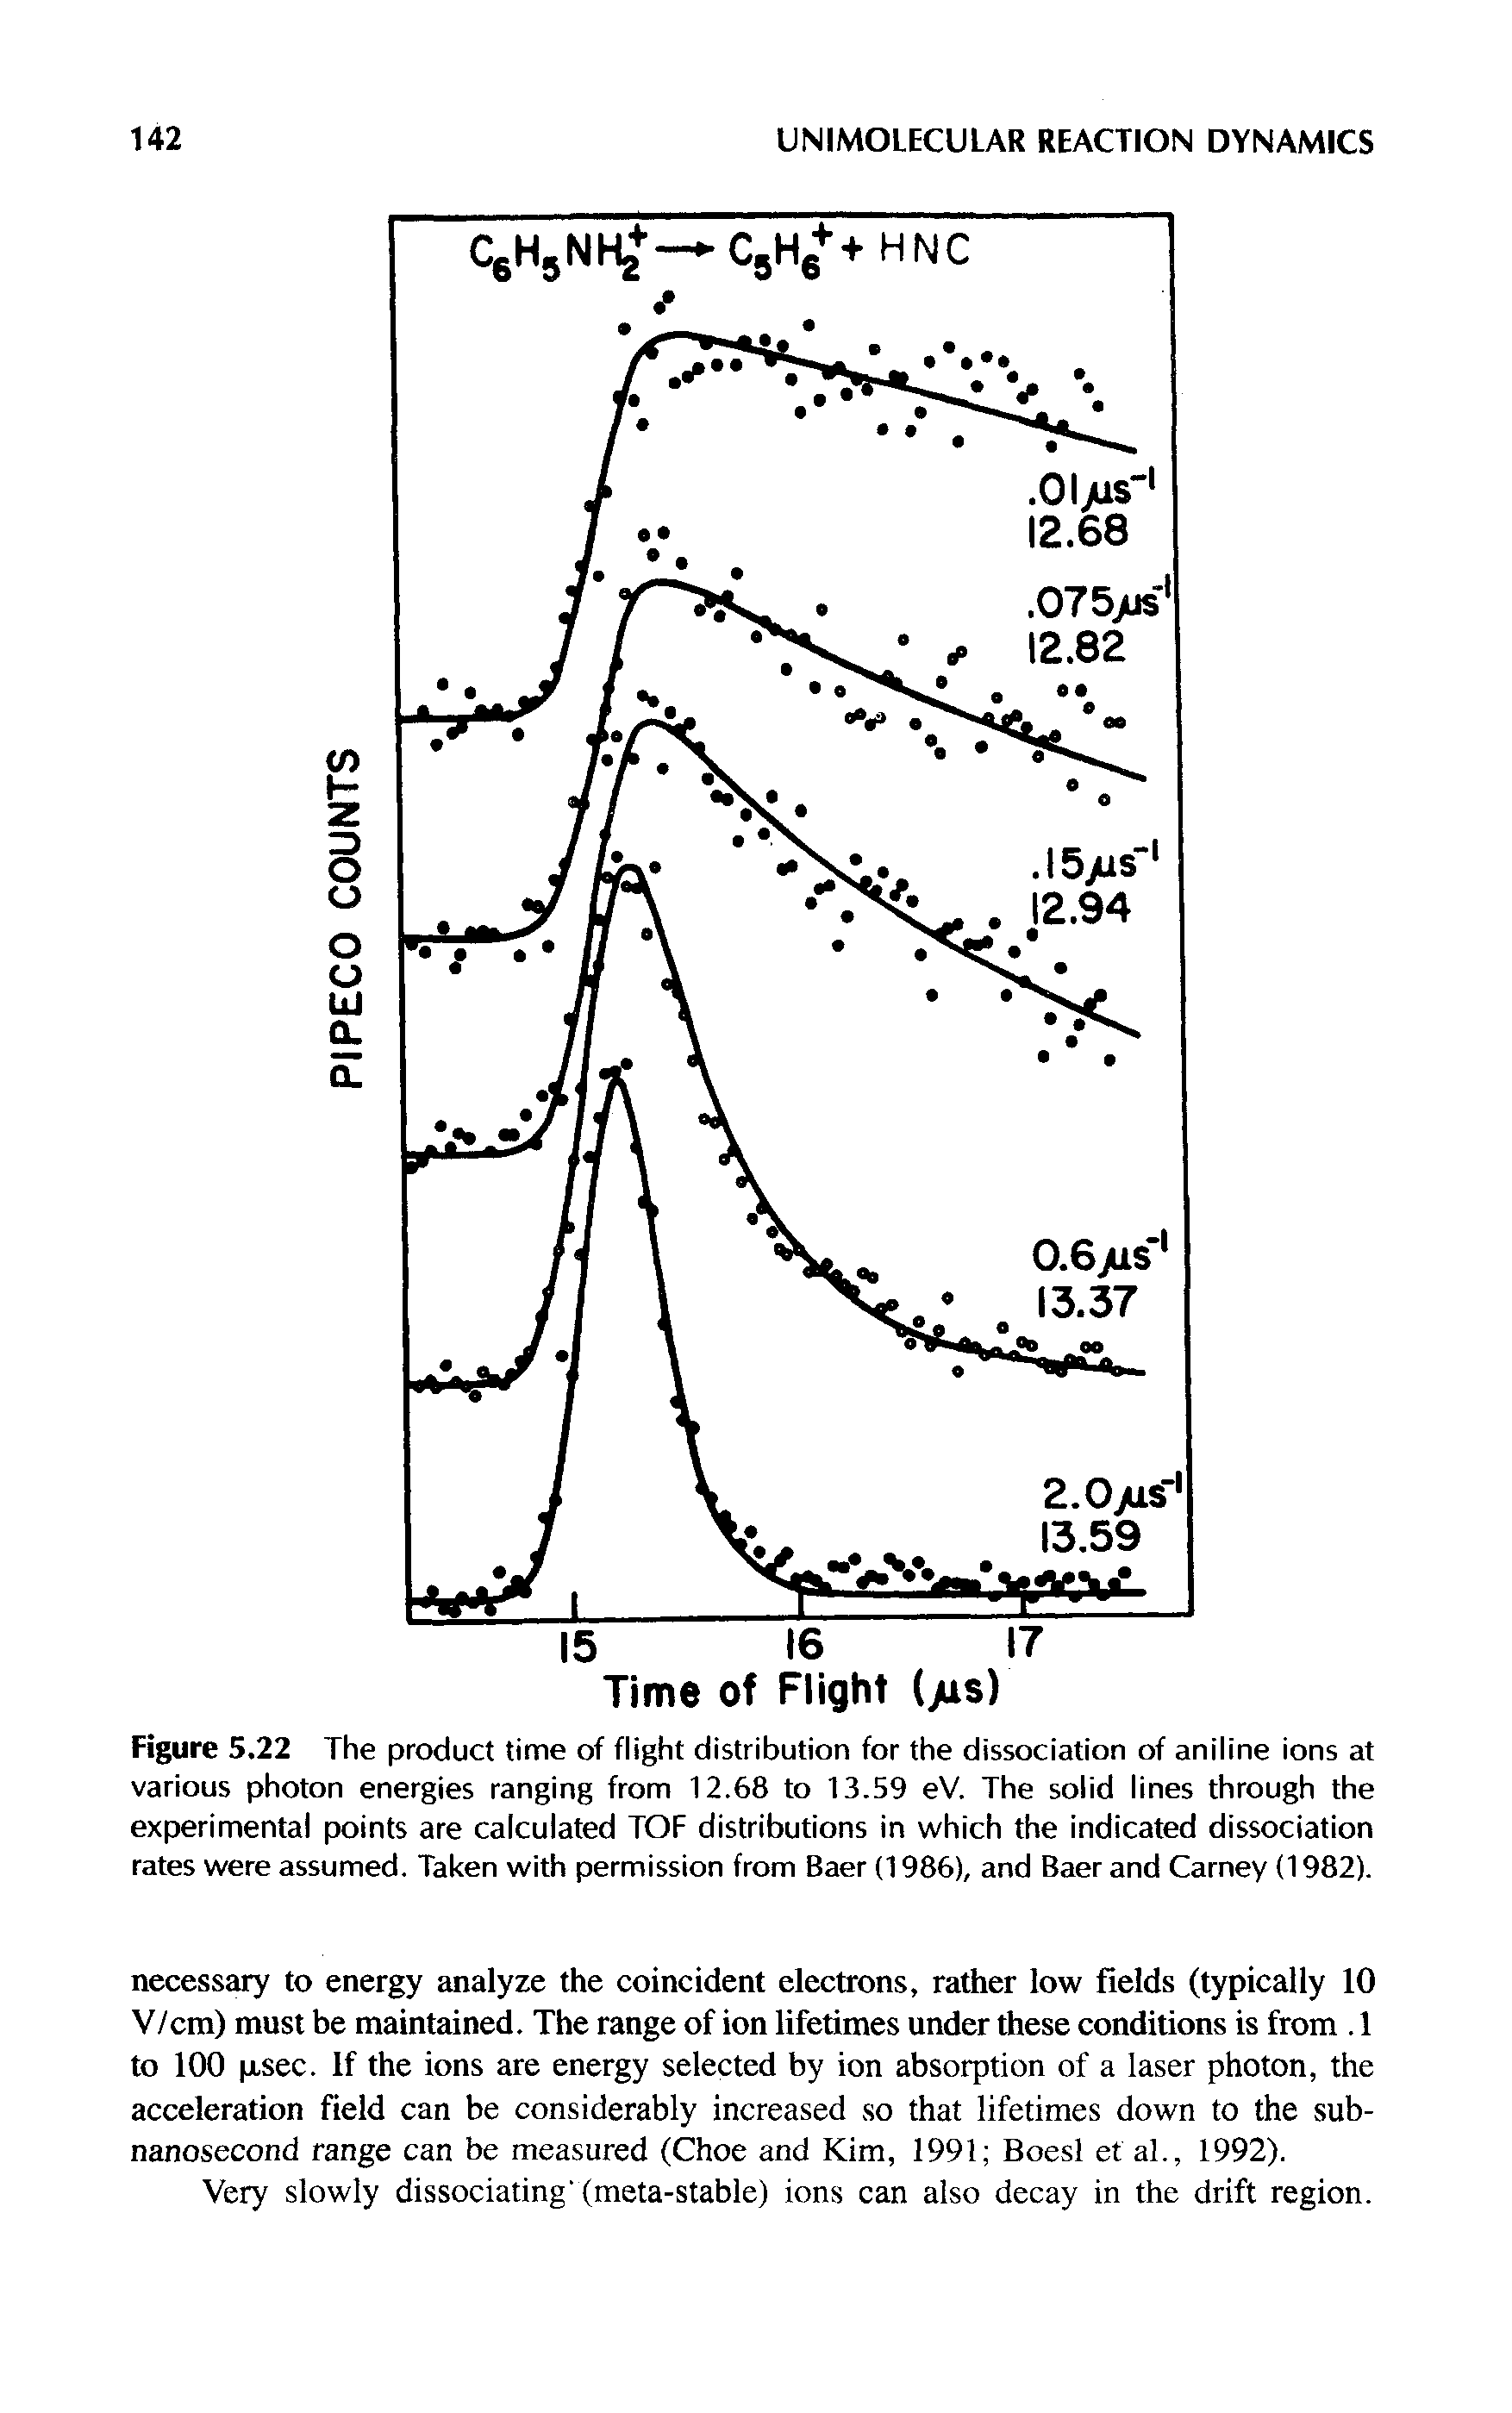 Figure 5.22 The product time of flight distribution for the dissociation of aniline ions at various photon energies ranging from 12.68 to 13.59 eV. The solid lines through the experimental points are calculated TOP distributions in which the indicated dissociation rates were assumed. Taken with permission from Baer (1986), and Baer and Carney (1982).